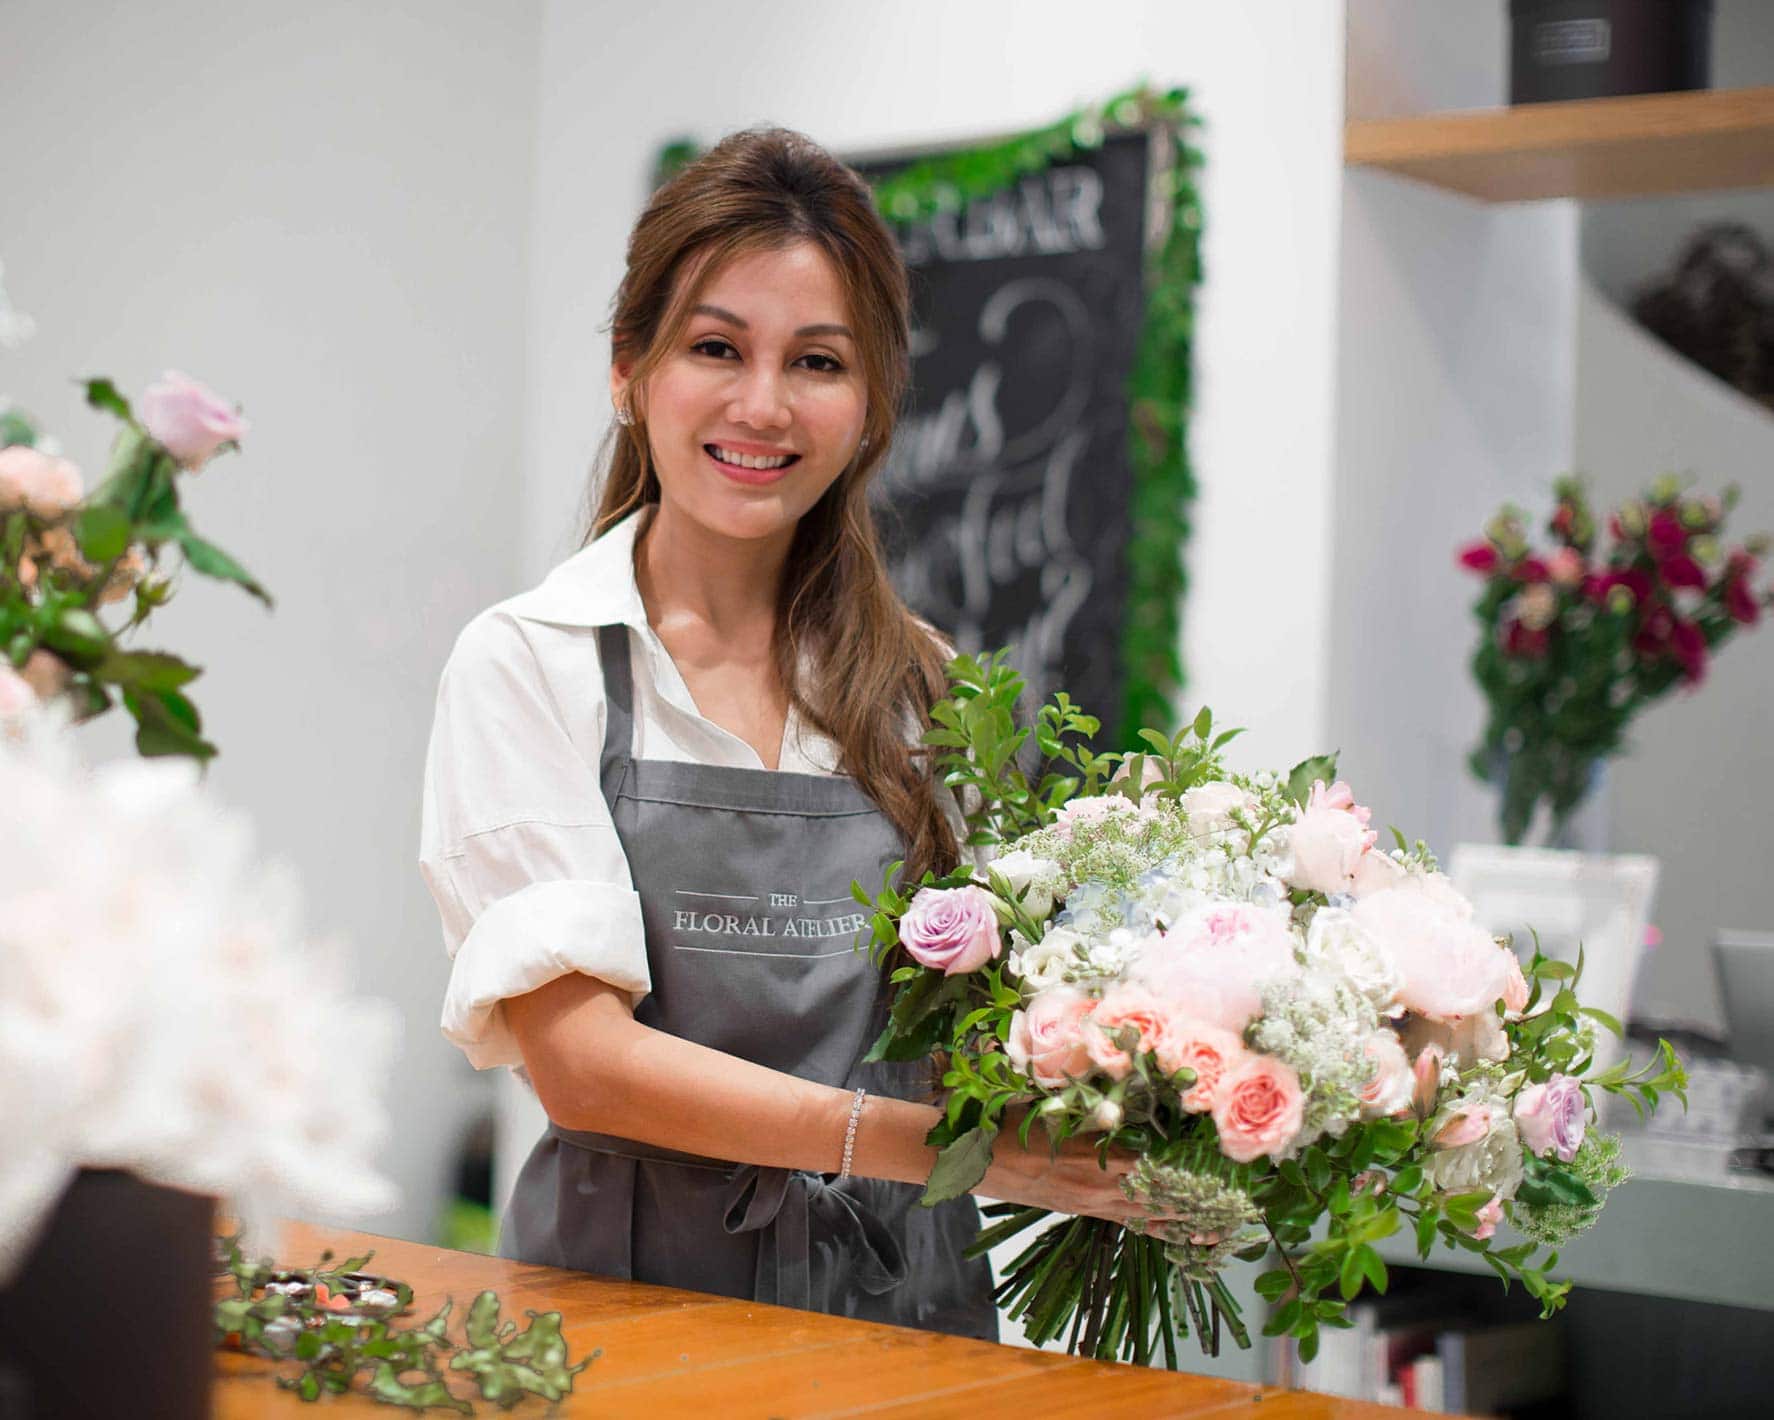 Business owner Lelian arranging flowers in her store. She uses Xero accounting software.